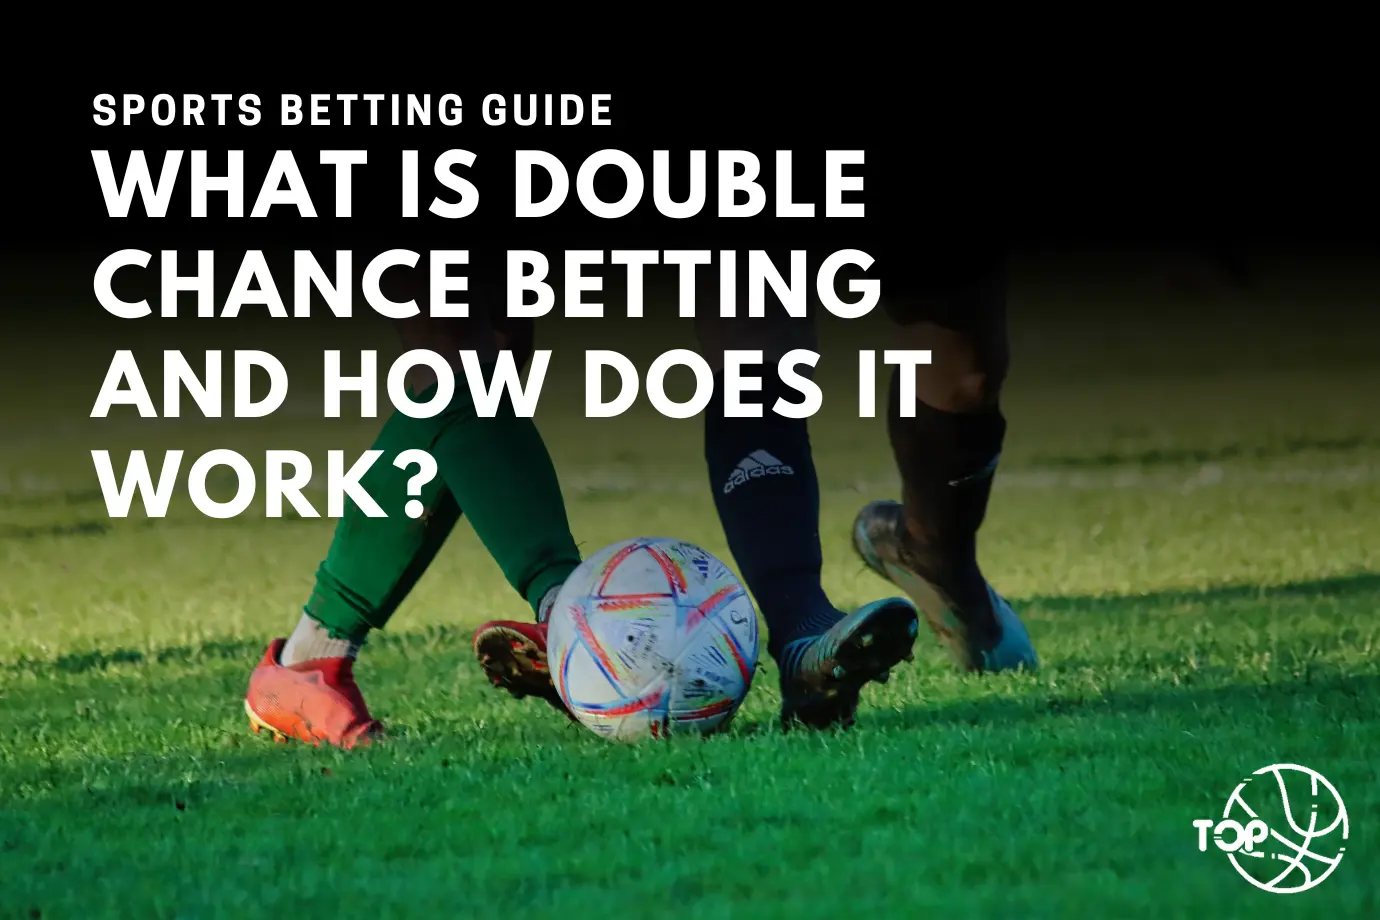 What is Double Chance Betting and How Does It Work?